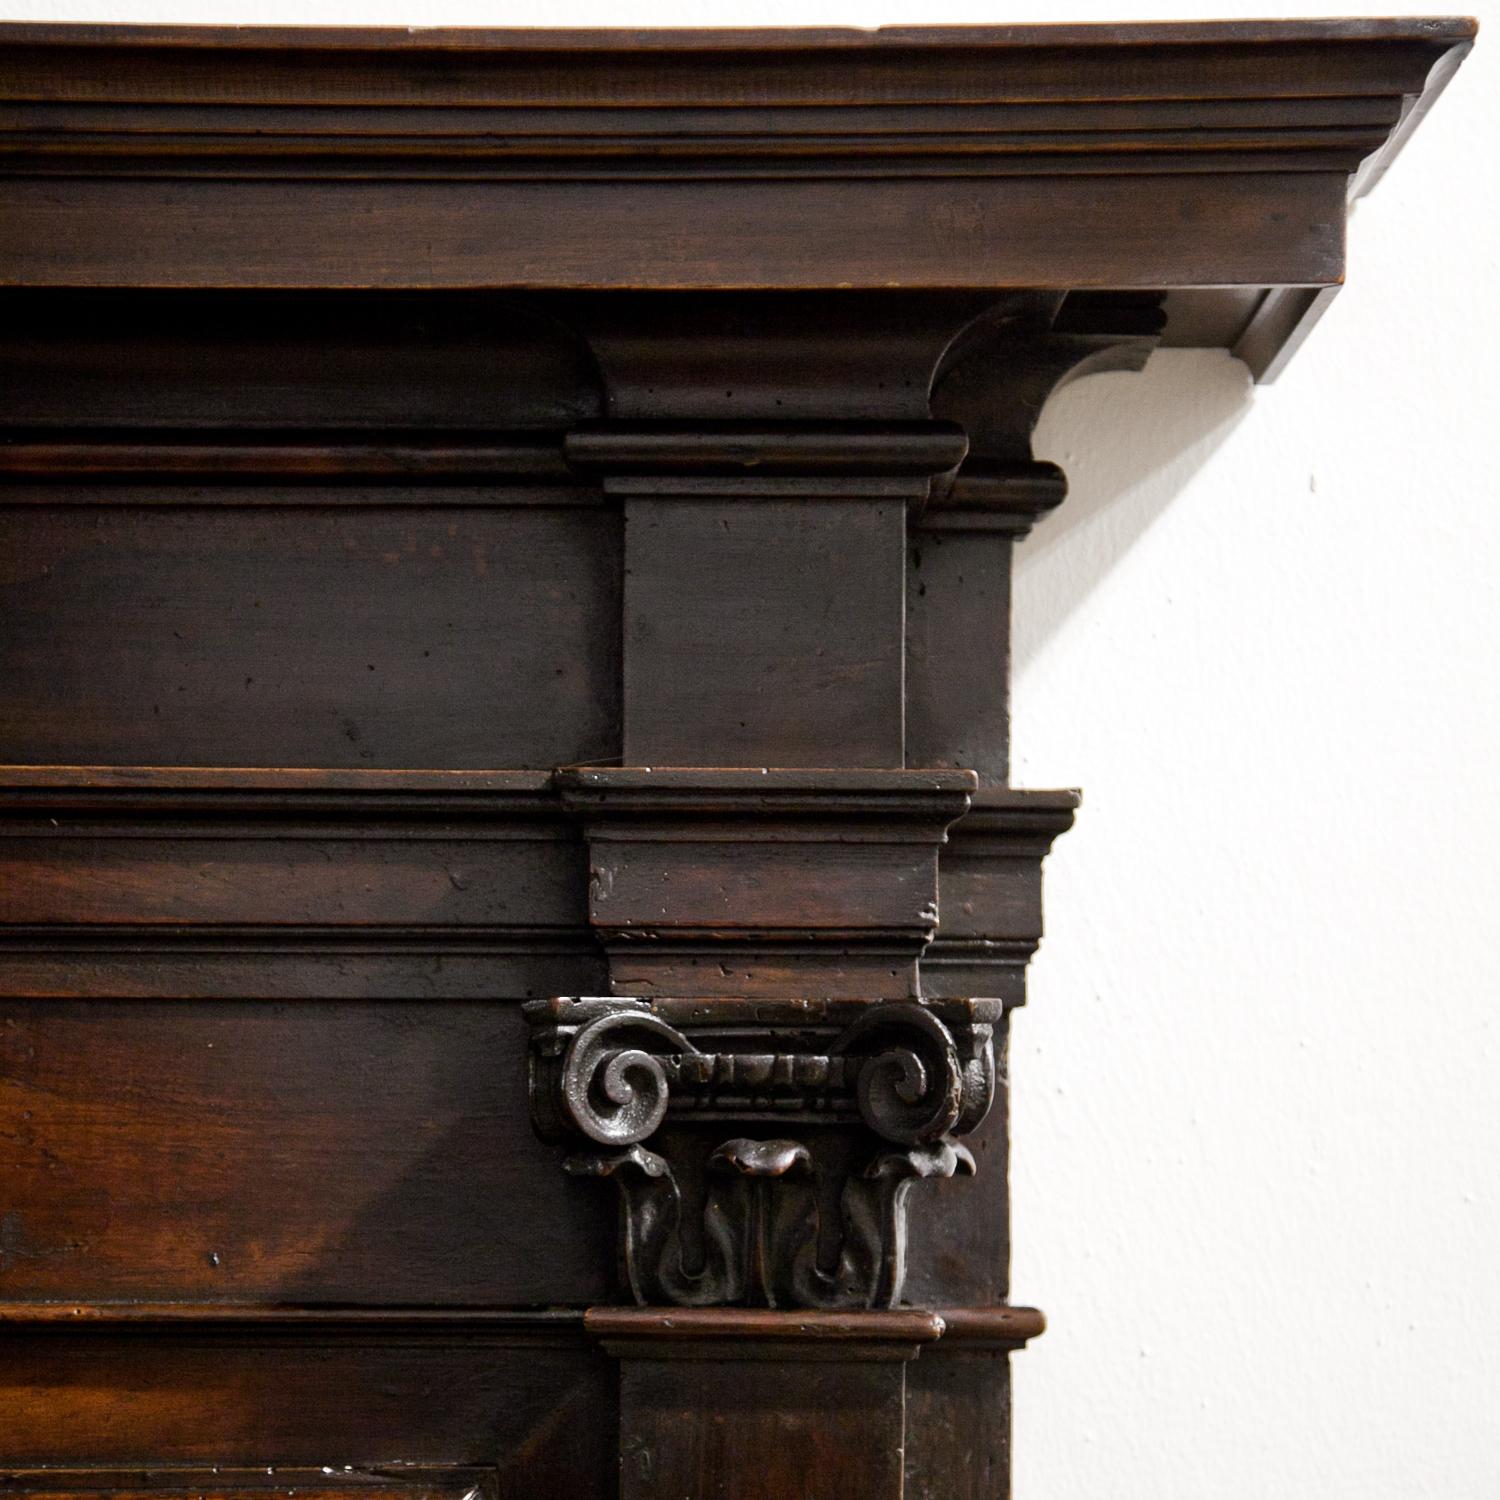 Long Renaissance-style bench, decorated with volutes with mascarons and paw-feet, ionic capitals and a coffered backrest, made out of walnut. The bench was remodeled under use of old parts of a choir stall. The top and base rail are new.